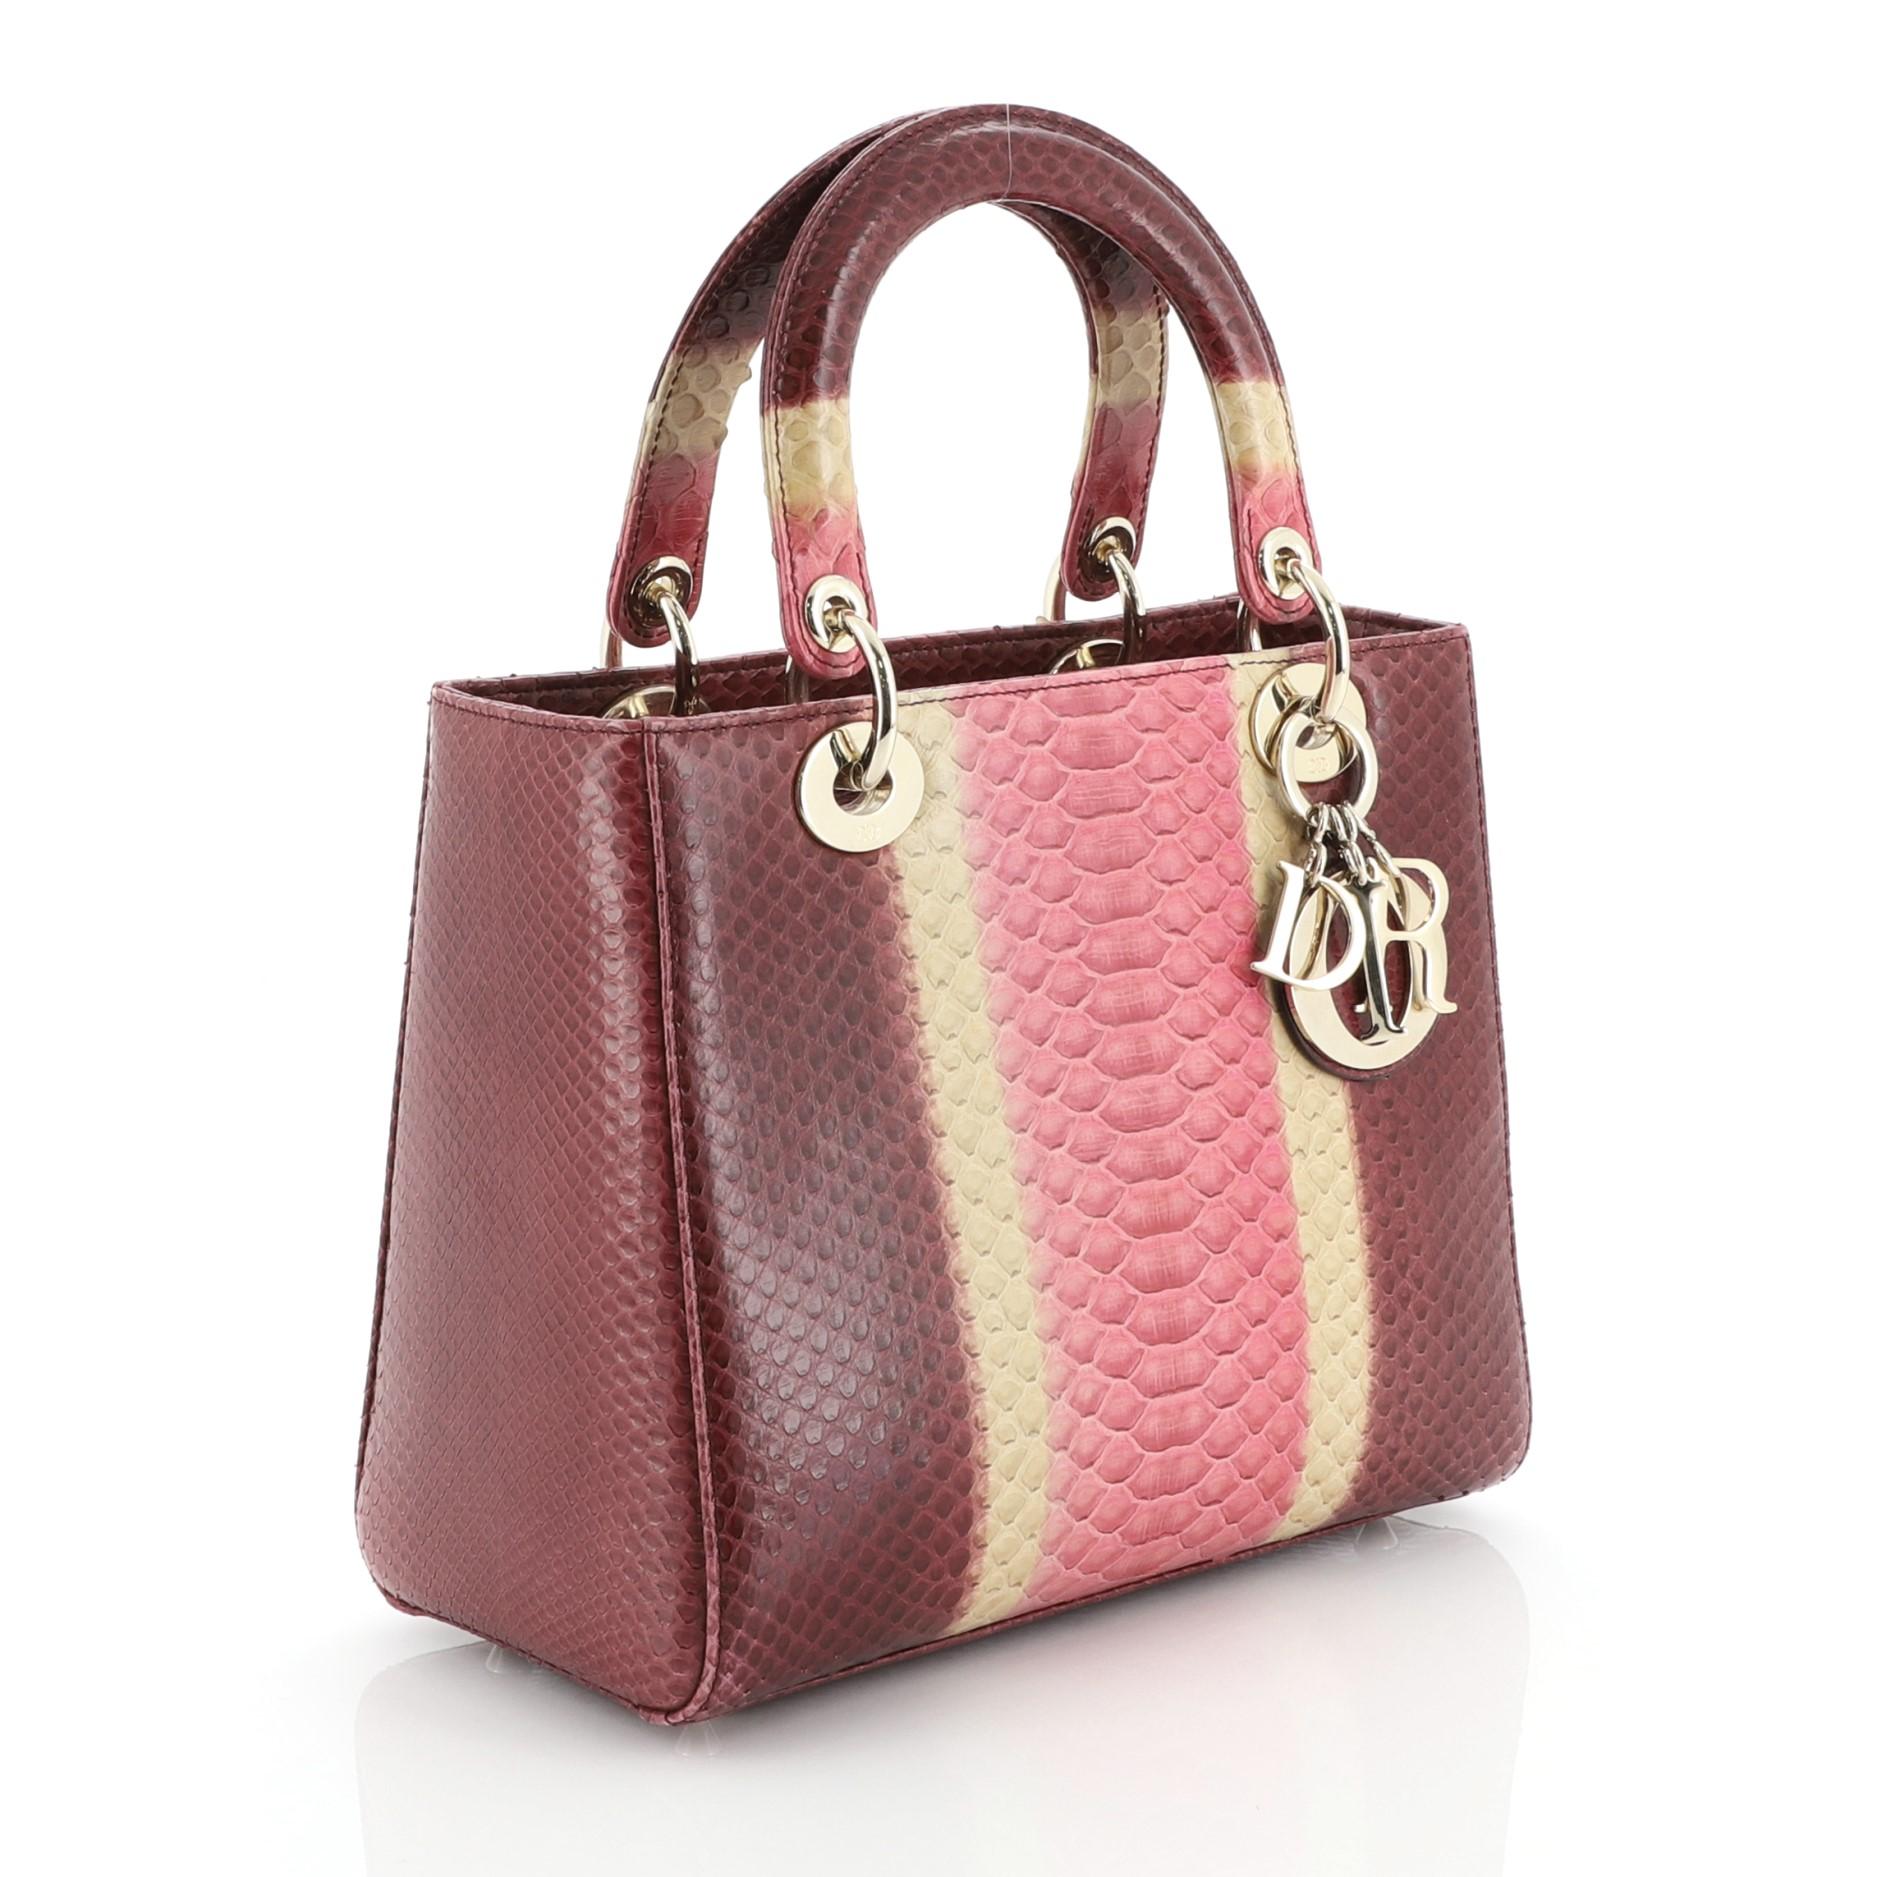 This Christian Dior Lady Dior Bag Python Medium, crafted in genuine purple multicolor python skin, features dual rolled handles with sleek Dior charms, and gold-tone hardware. Its top zipper closure opens to a purple leather interior with side zip